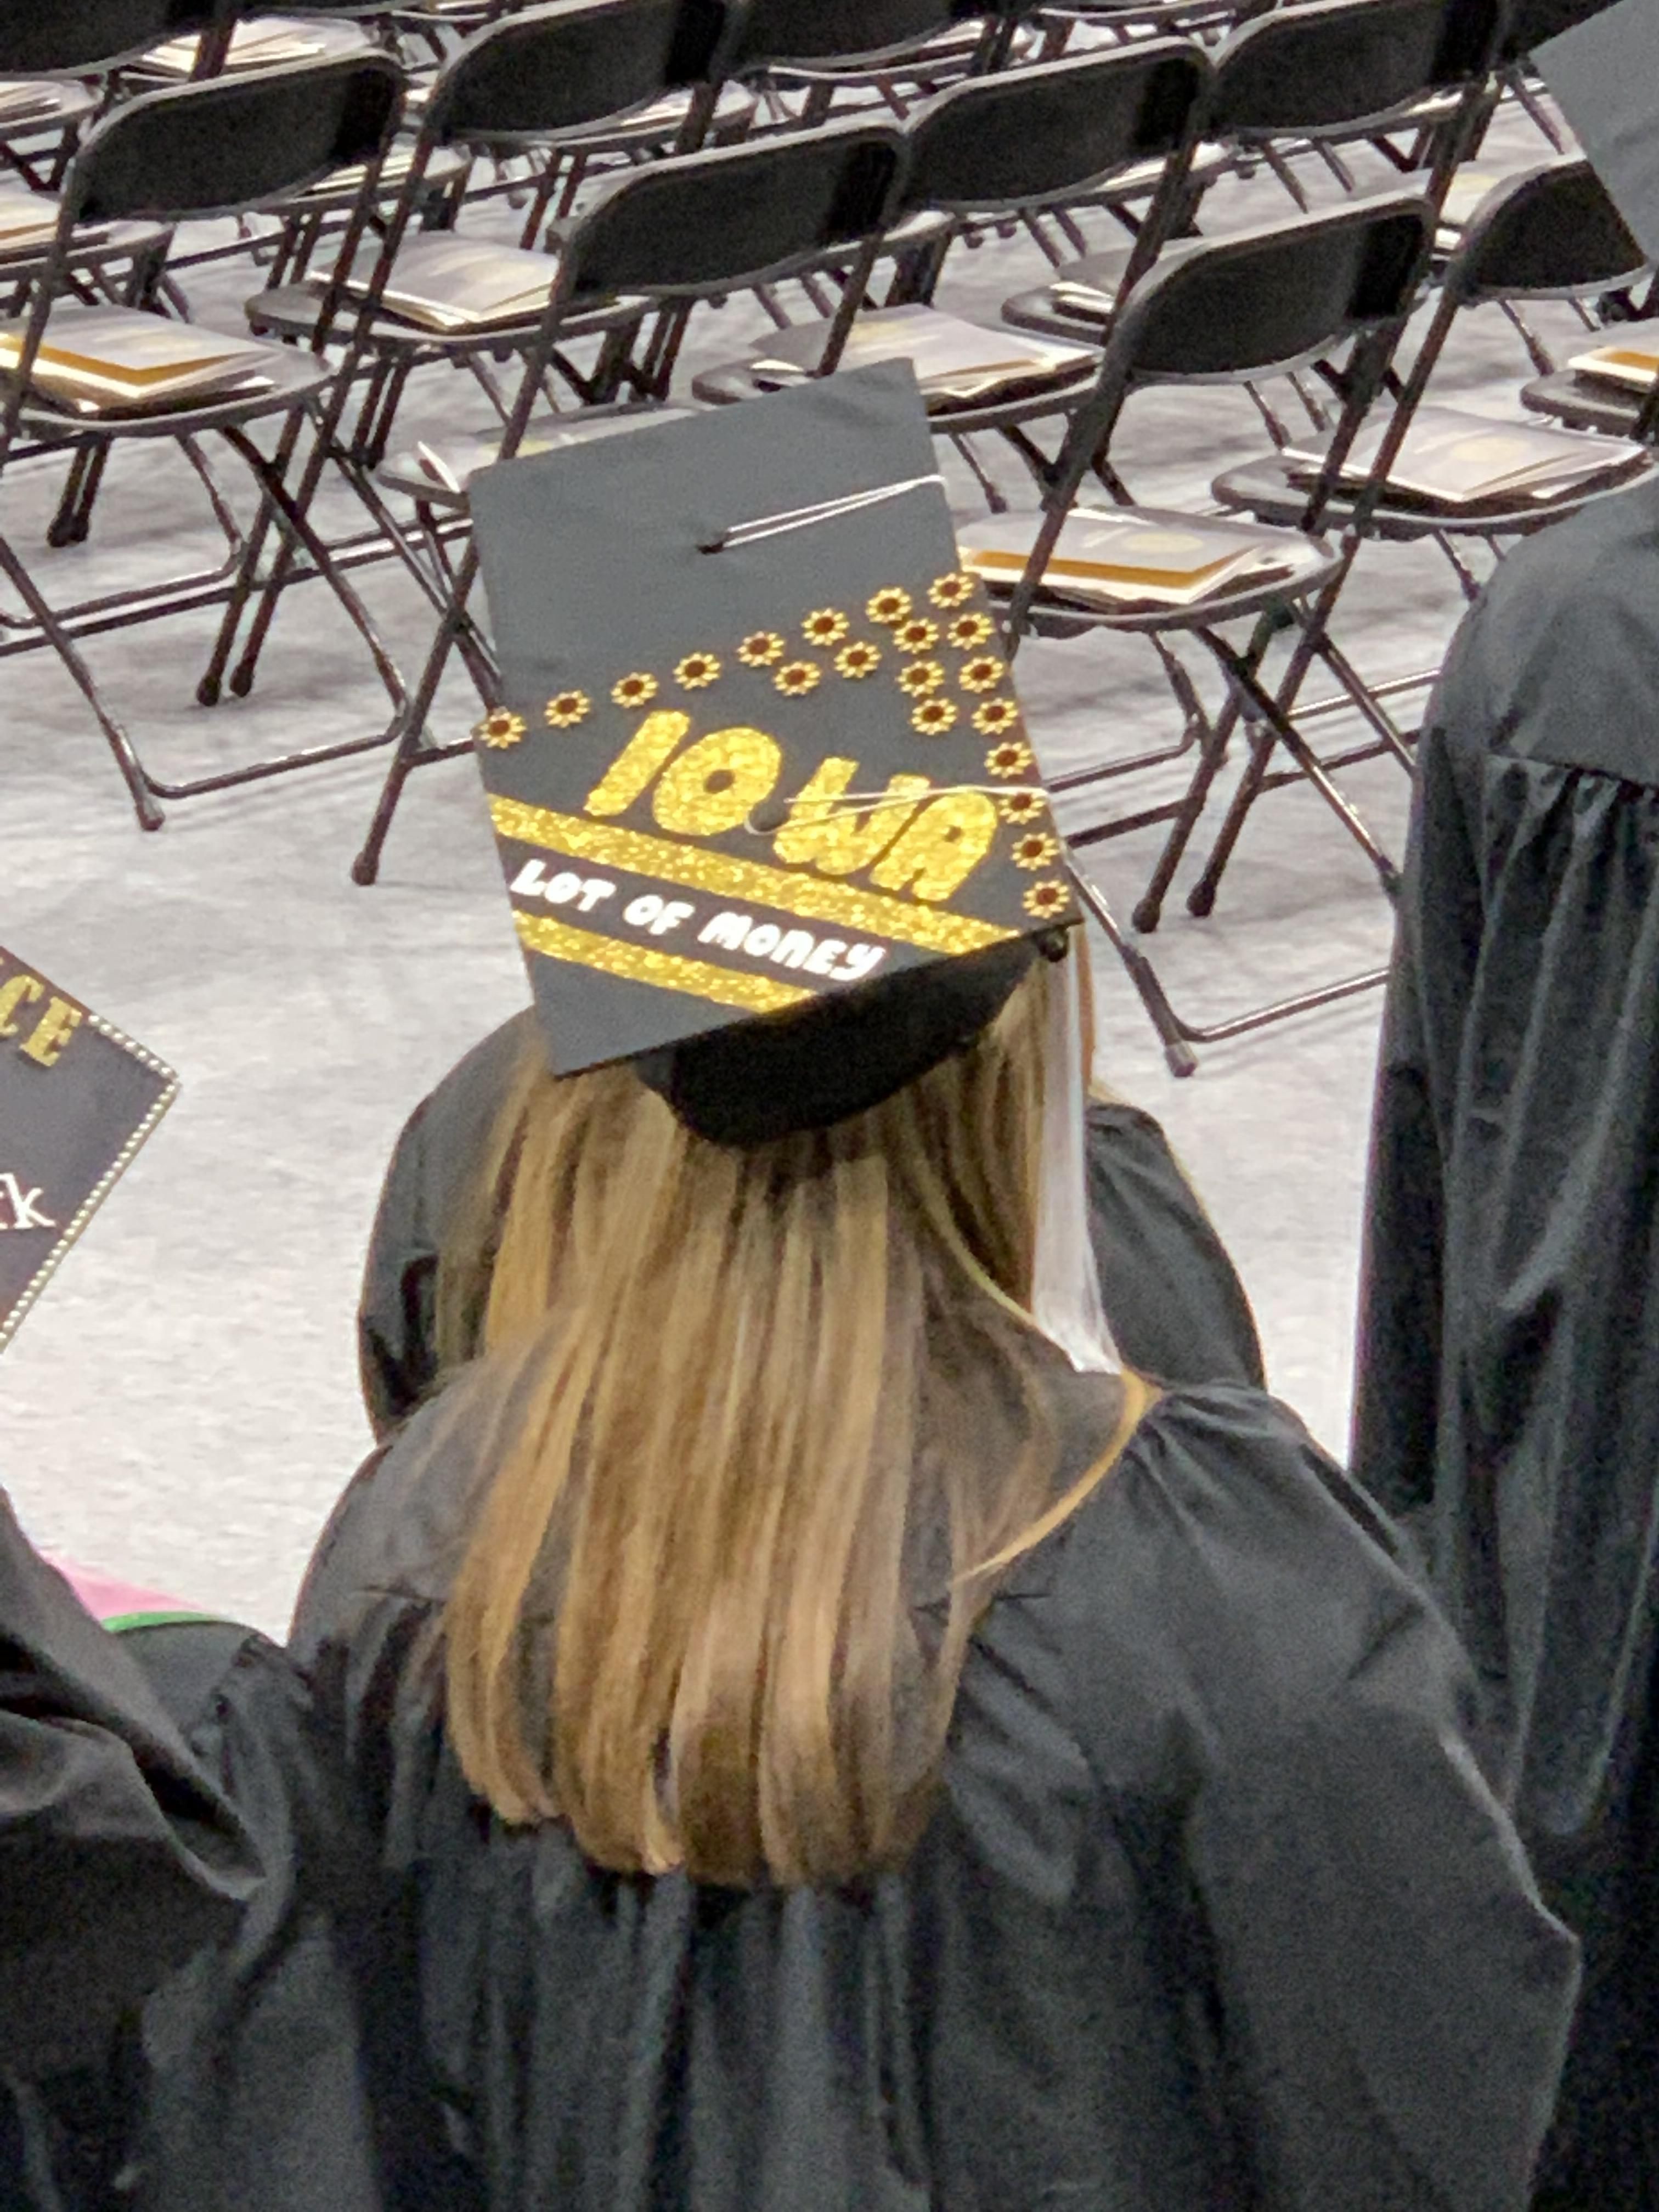 Spotted this weekend at University of Iowa graduation